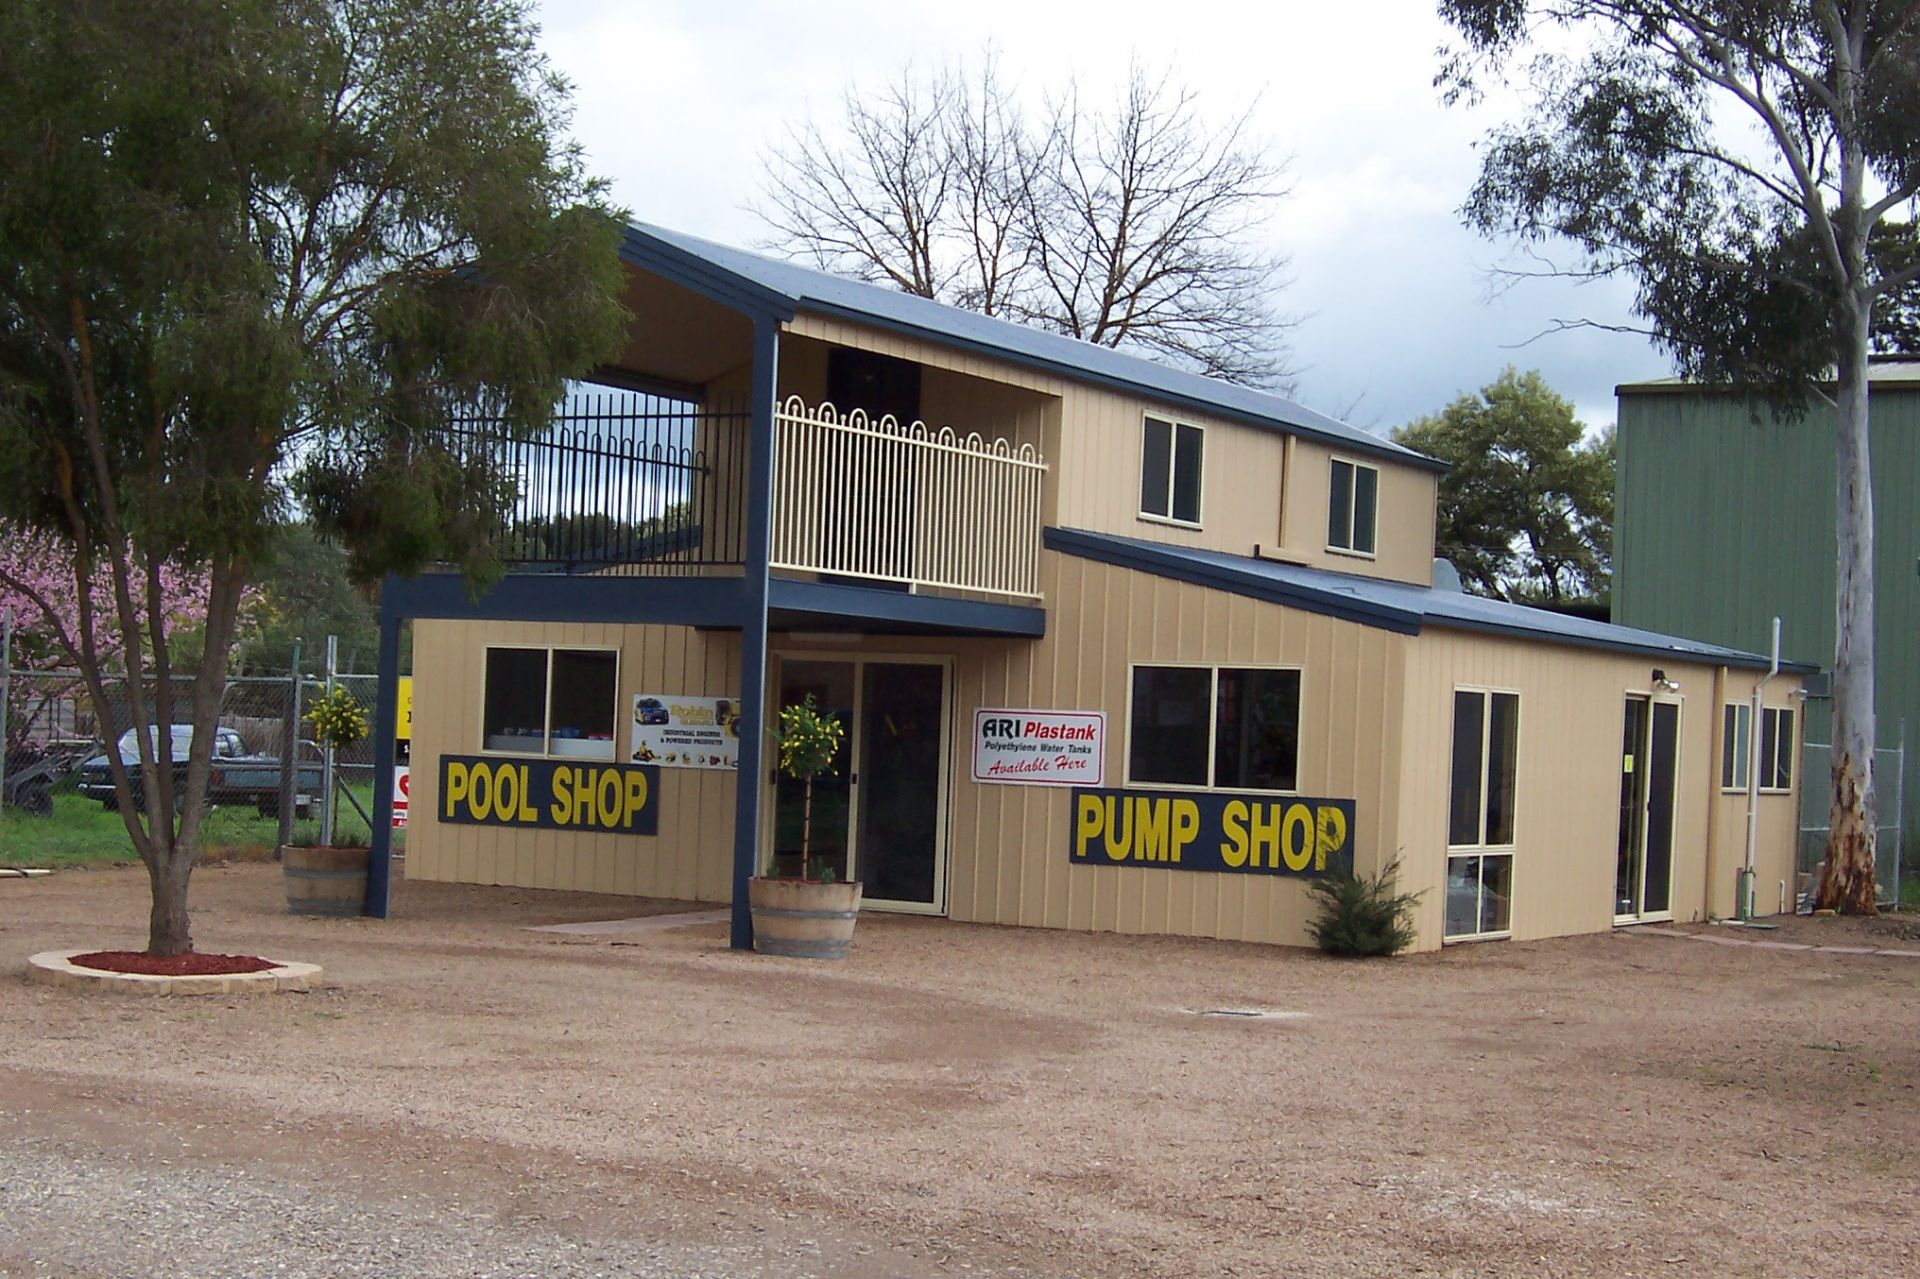 FREEHOLD COMMERCIAL SALE WITH RETAIL PUMP BUSINESS AND RESIDENCE...